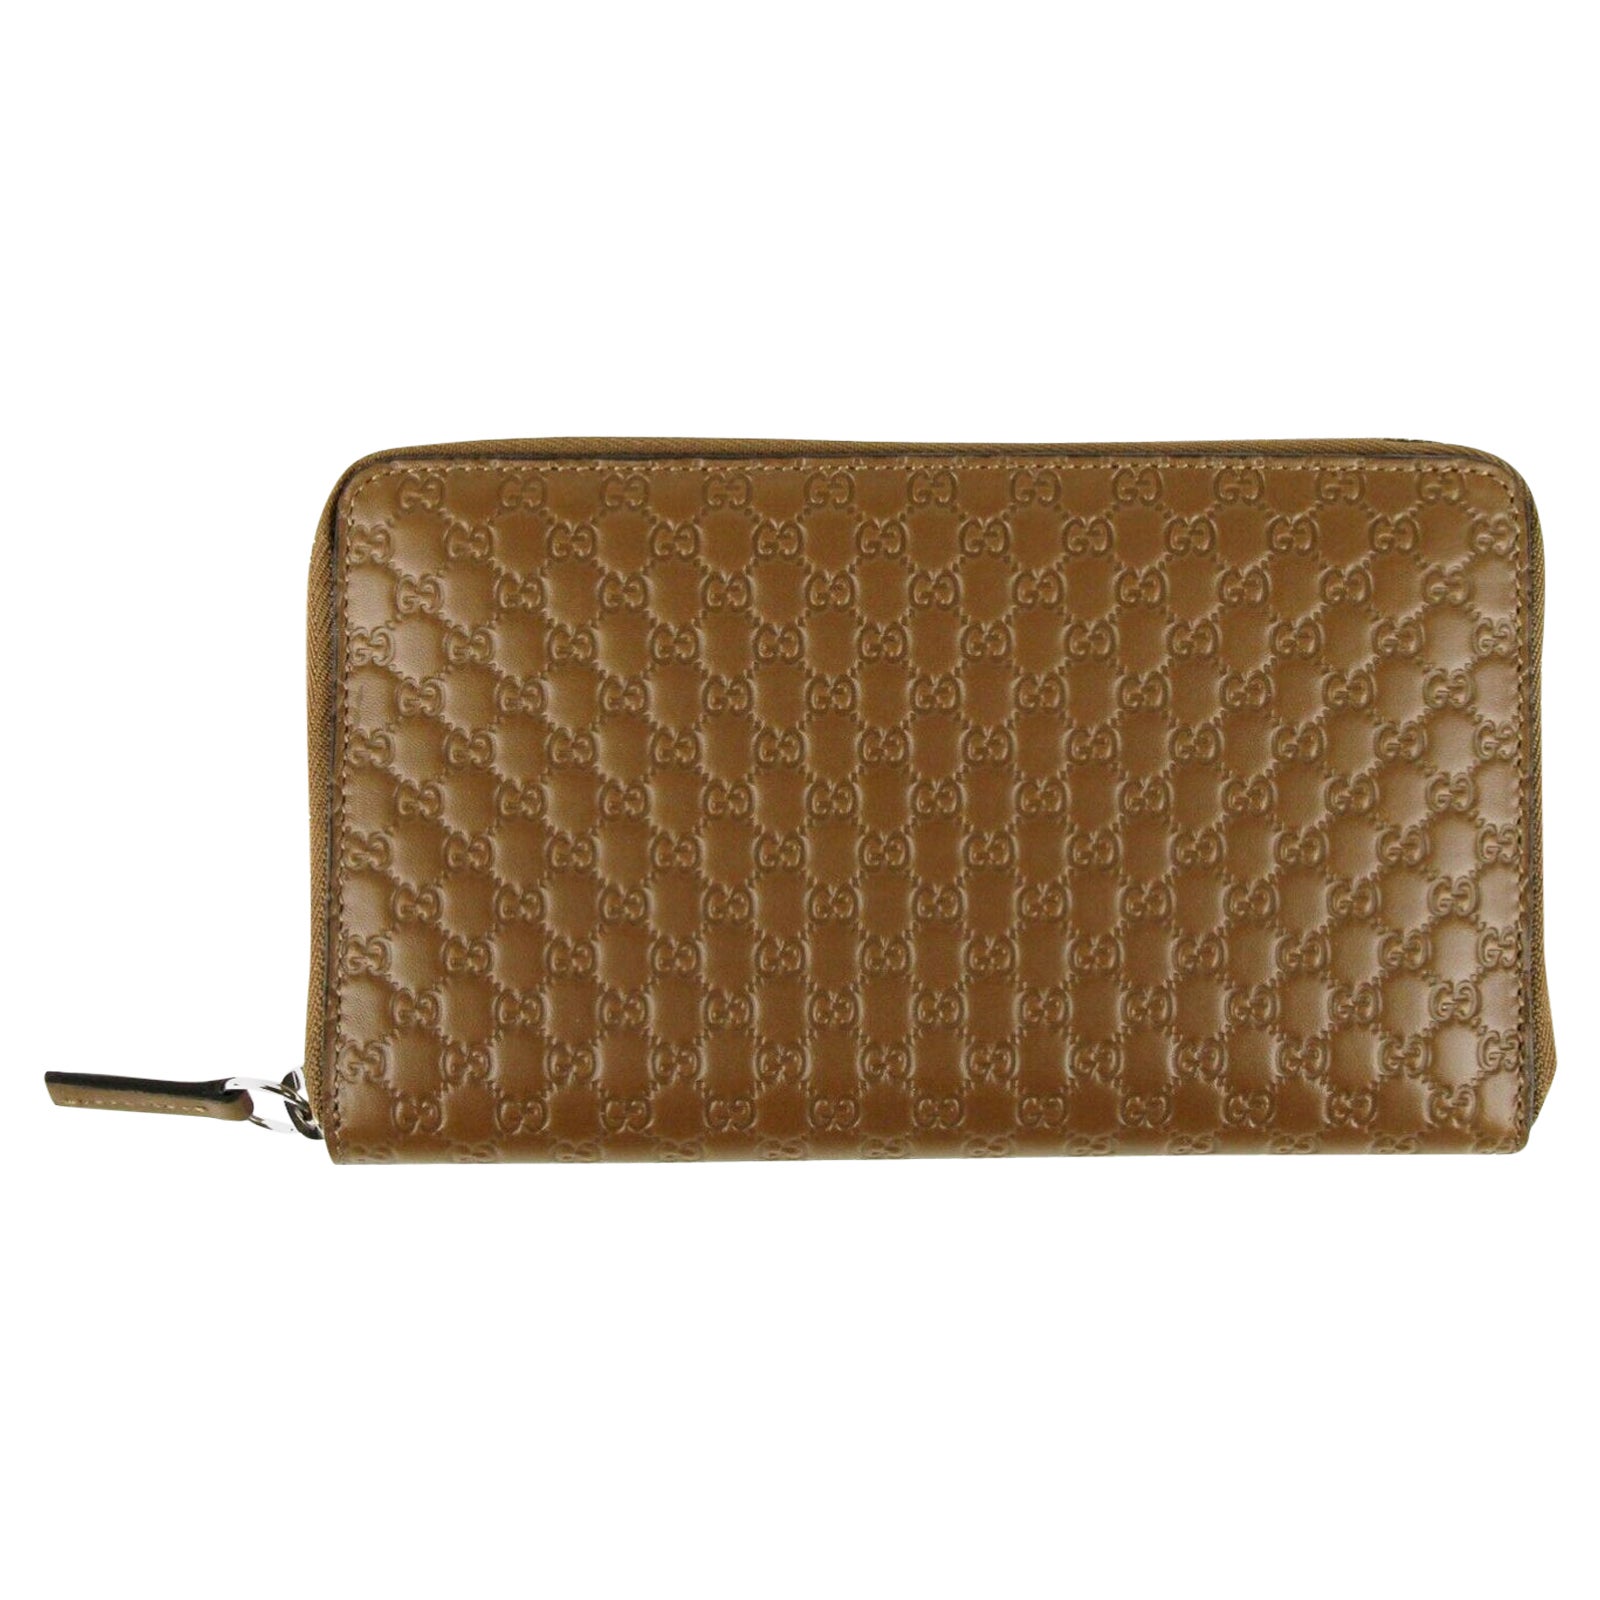 Gucci Extra Large Light Brown Leather Micros GG Wallet